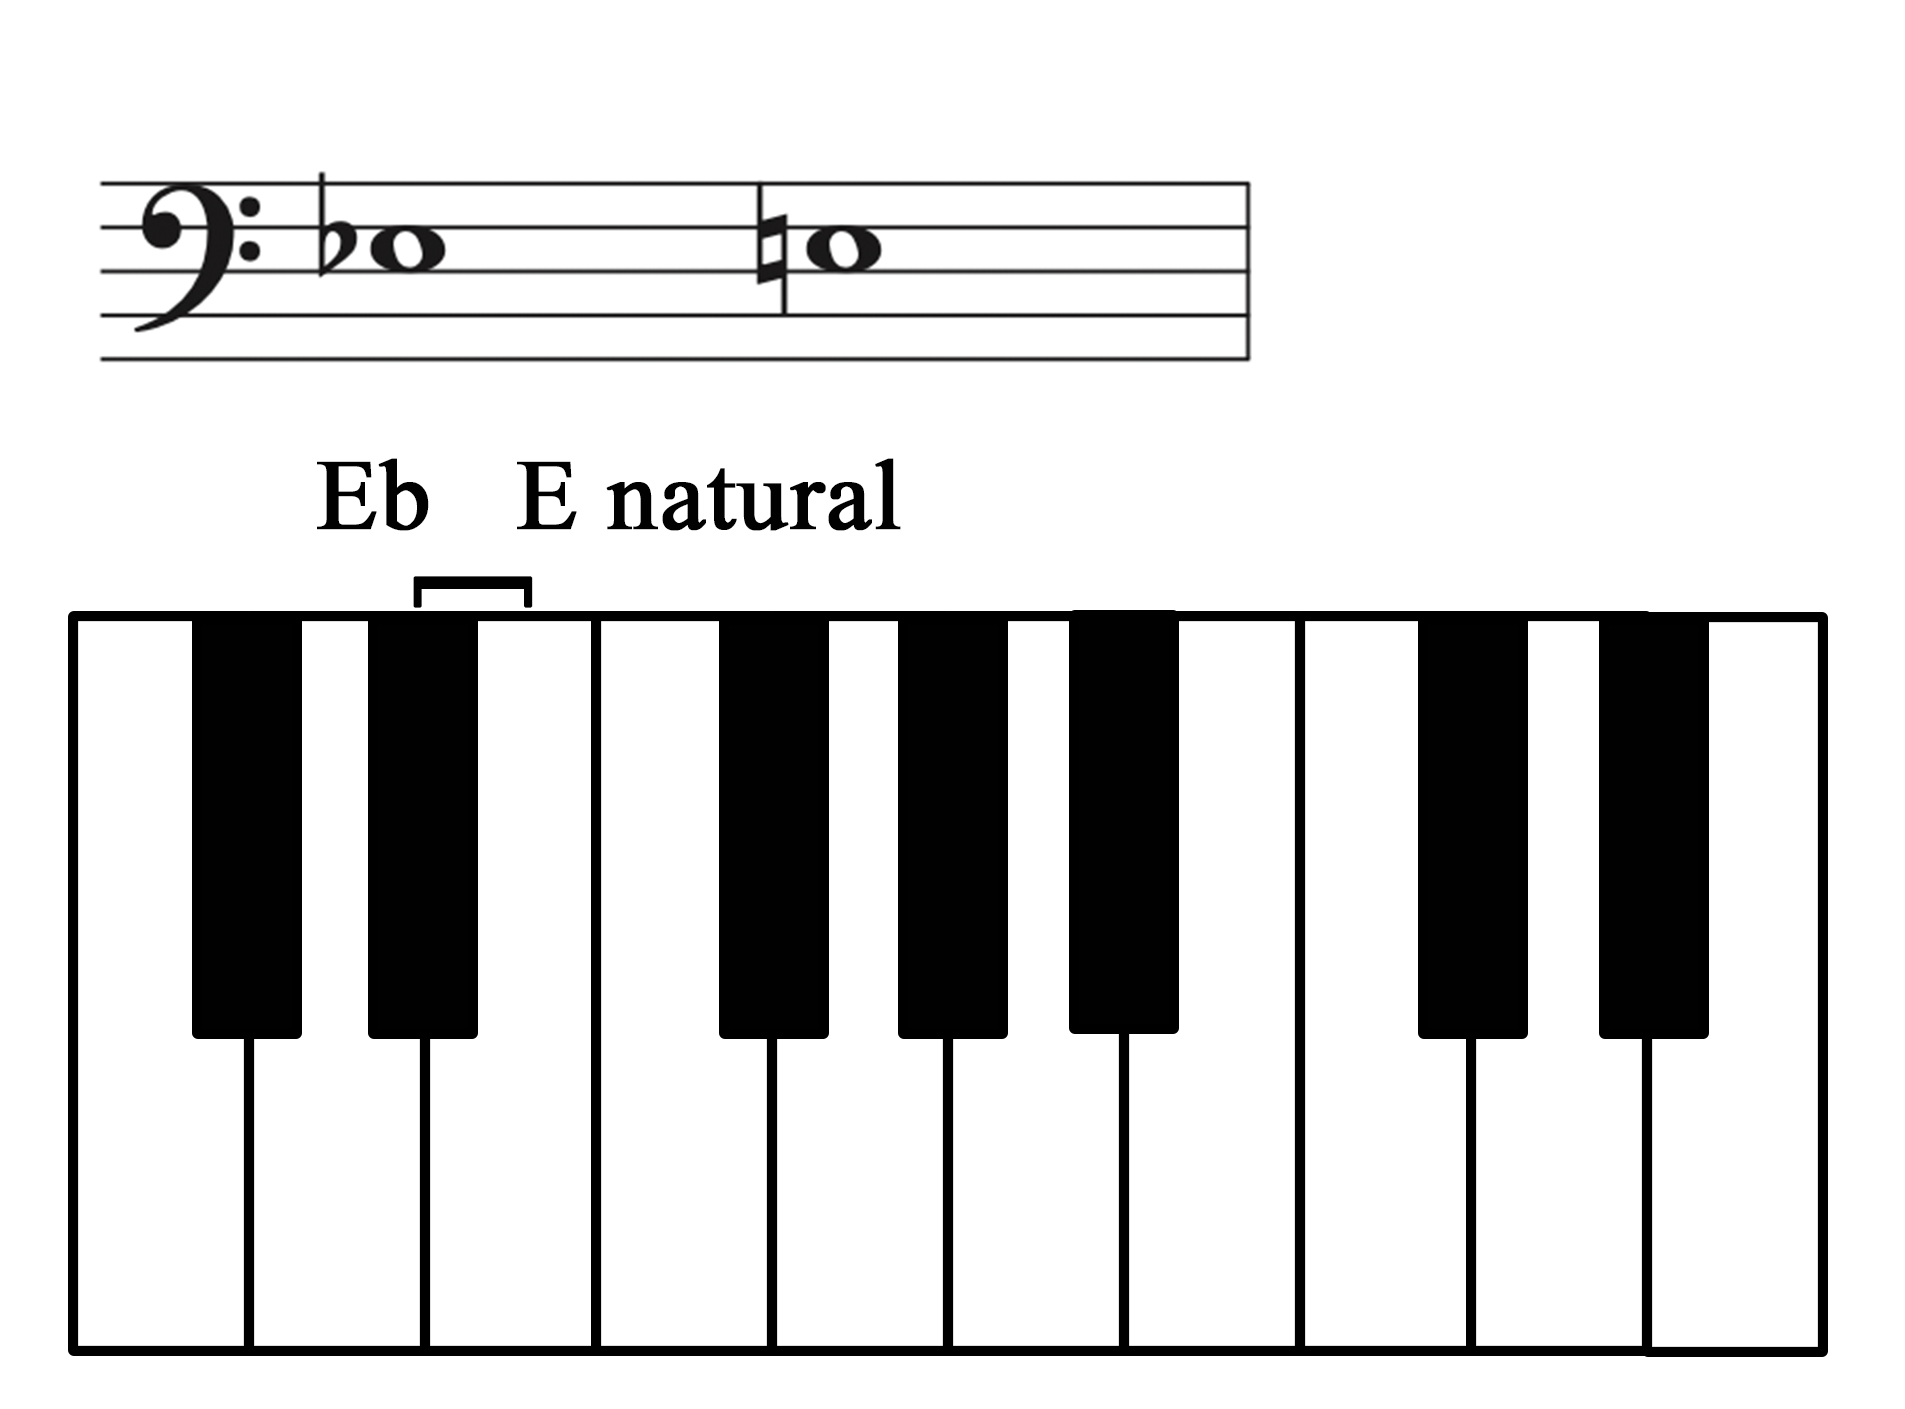 A keyboard with E-flat to E-natural labeled and shown on a staff.